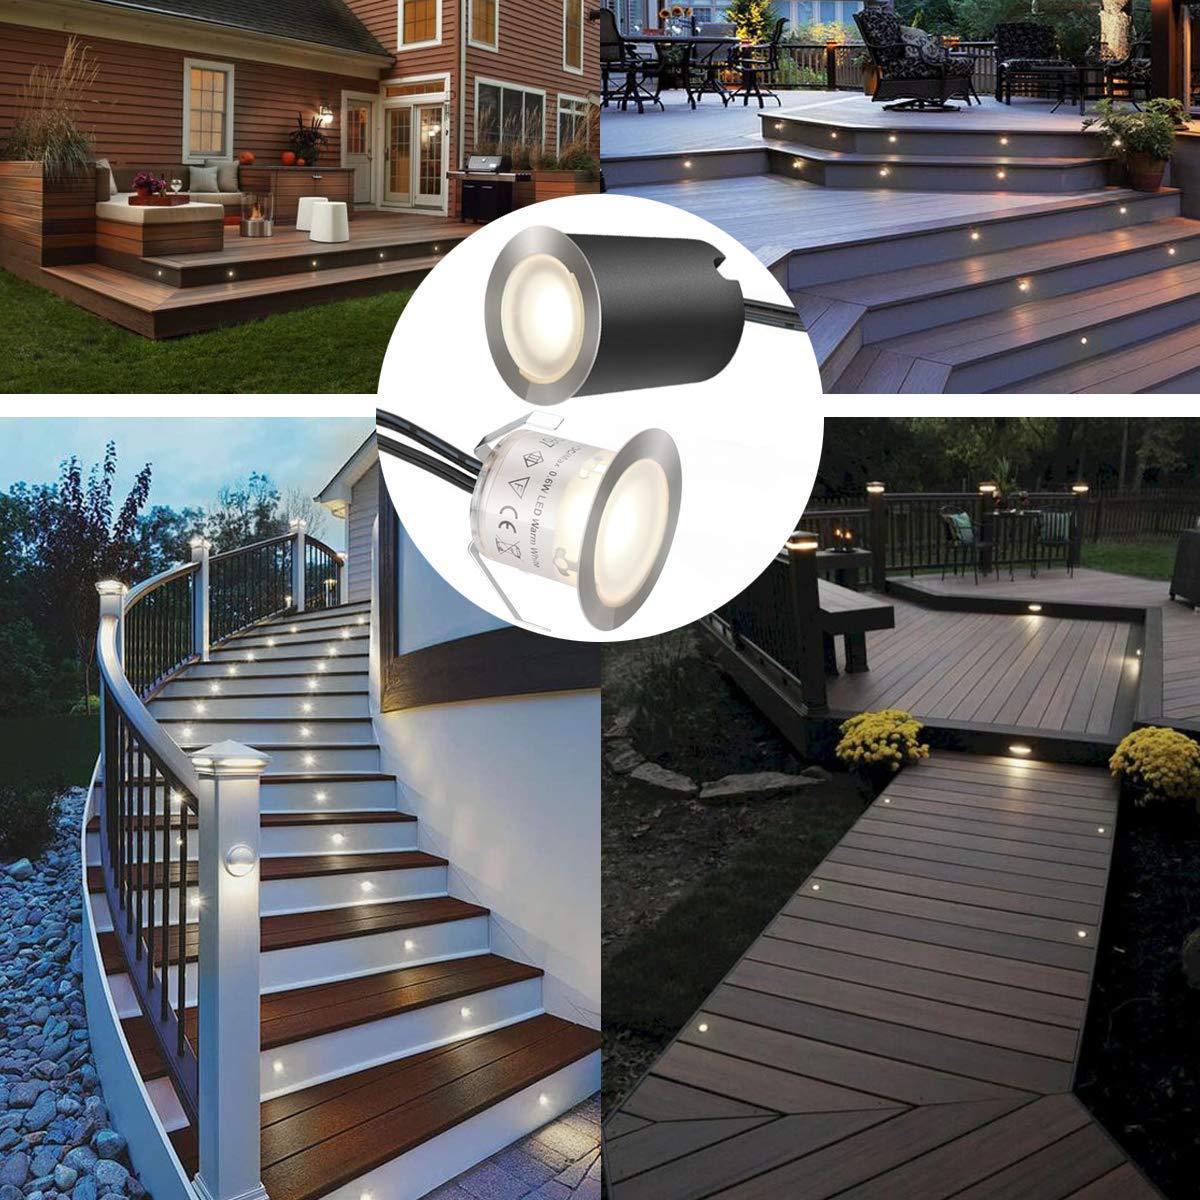 16 Pack Led recessed step light  In Ground Outdoor LED solar step Lights IP67 Waterproof,10V Low Voltage for Garden,Yard Stair,Patio,Floor,Kitchen Decoration